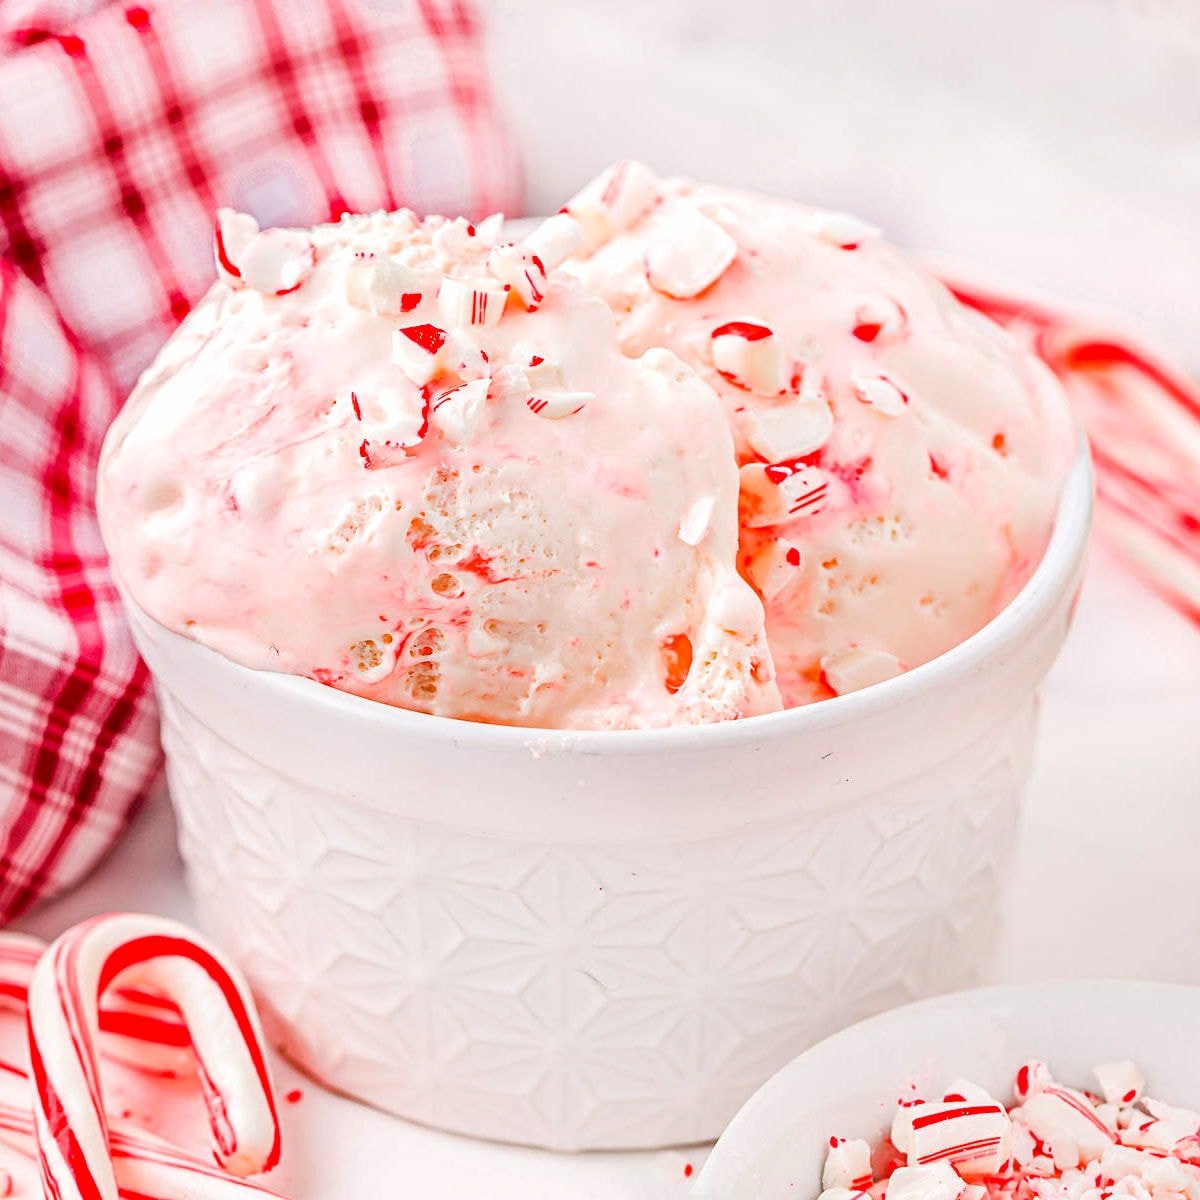 https://www.momontimeout.com/wp-content/uploads/2022/11/perfect-peppermint-ice-cream-square.jpeg